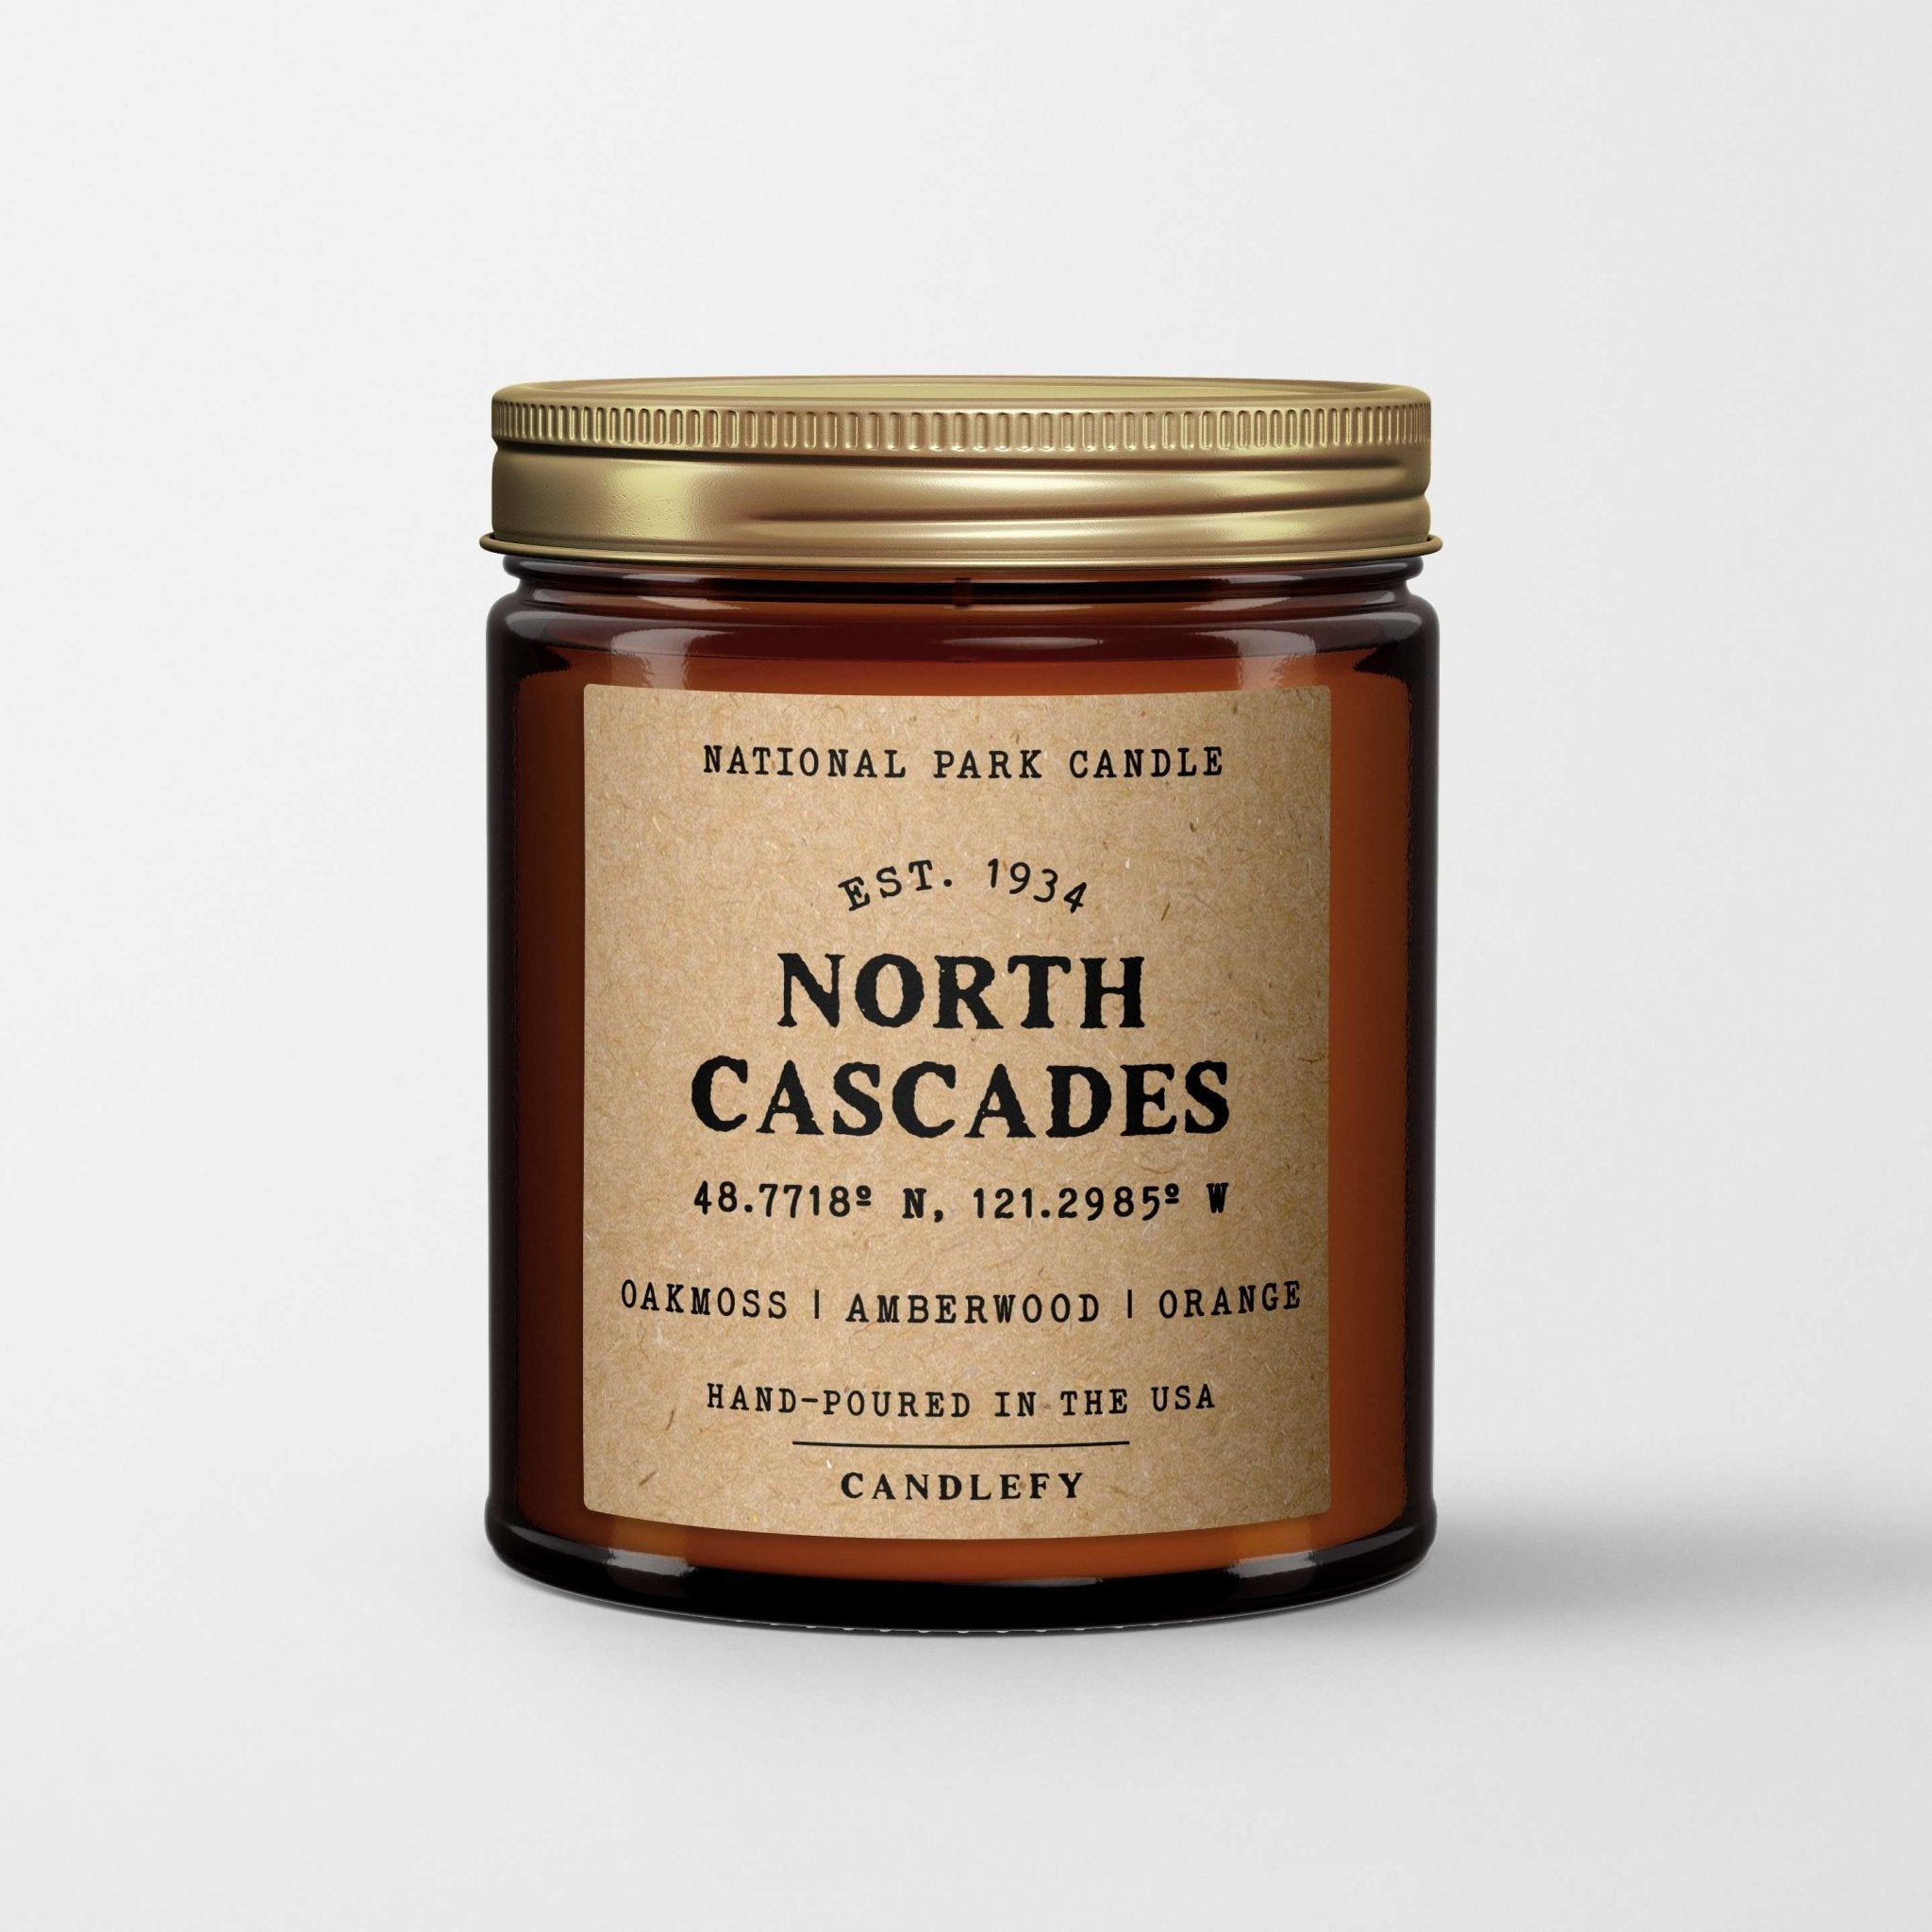 North Cascades National Park Candle - Candlefy